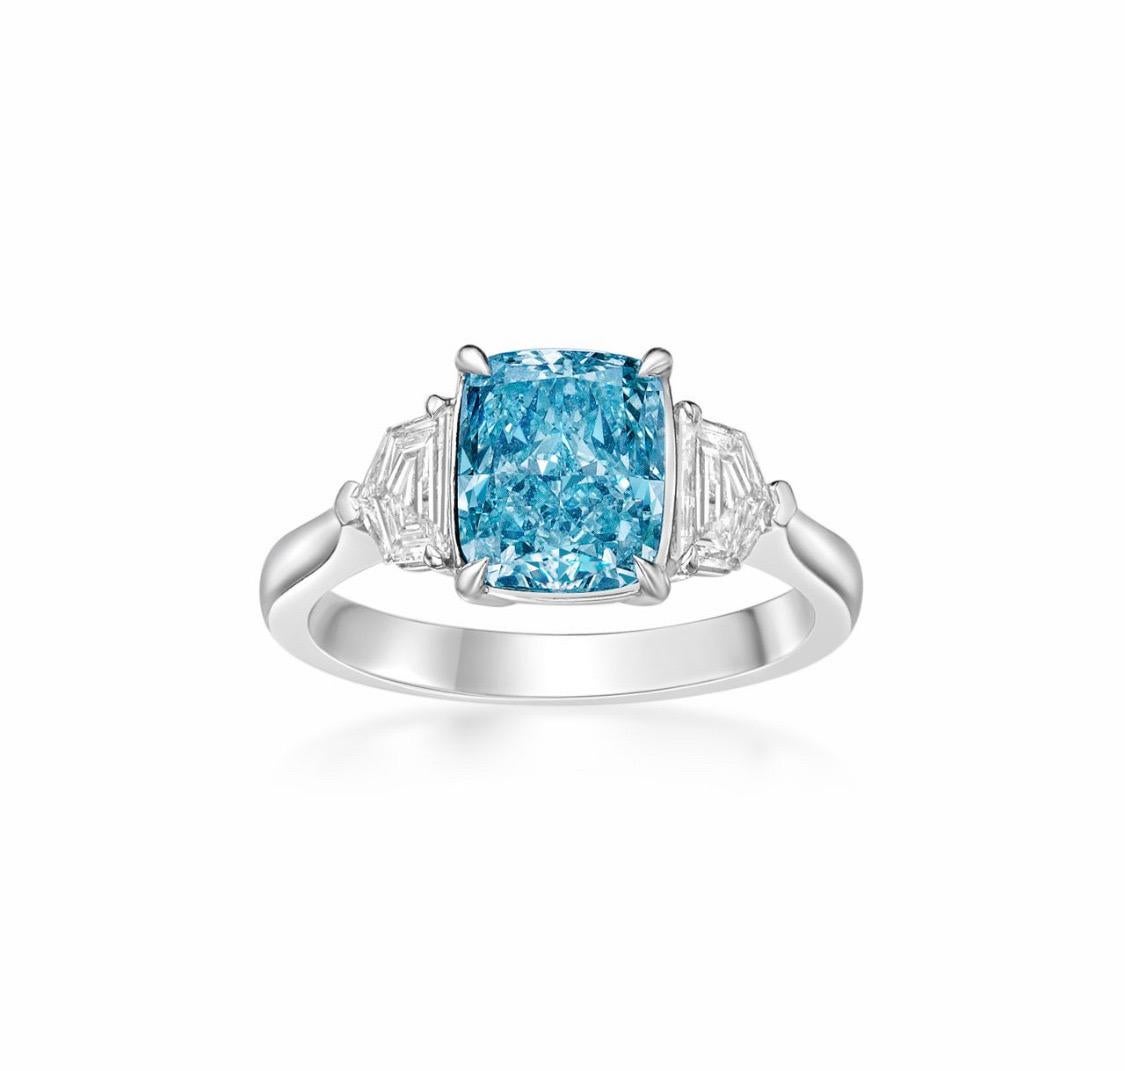 From Emilio Jewelry, a well known and respected wholesaler/dealer located on New York’s iconic Fifth Avenue, 
2.73 Carat total weight rare investment piece, featuring a Gia certified natural Fancy Intense Bluish Green diamond set in the center.